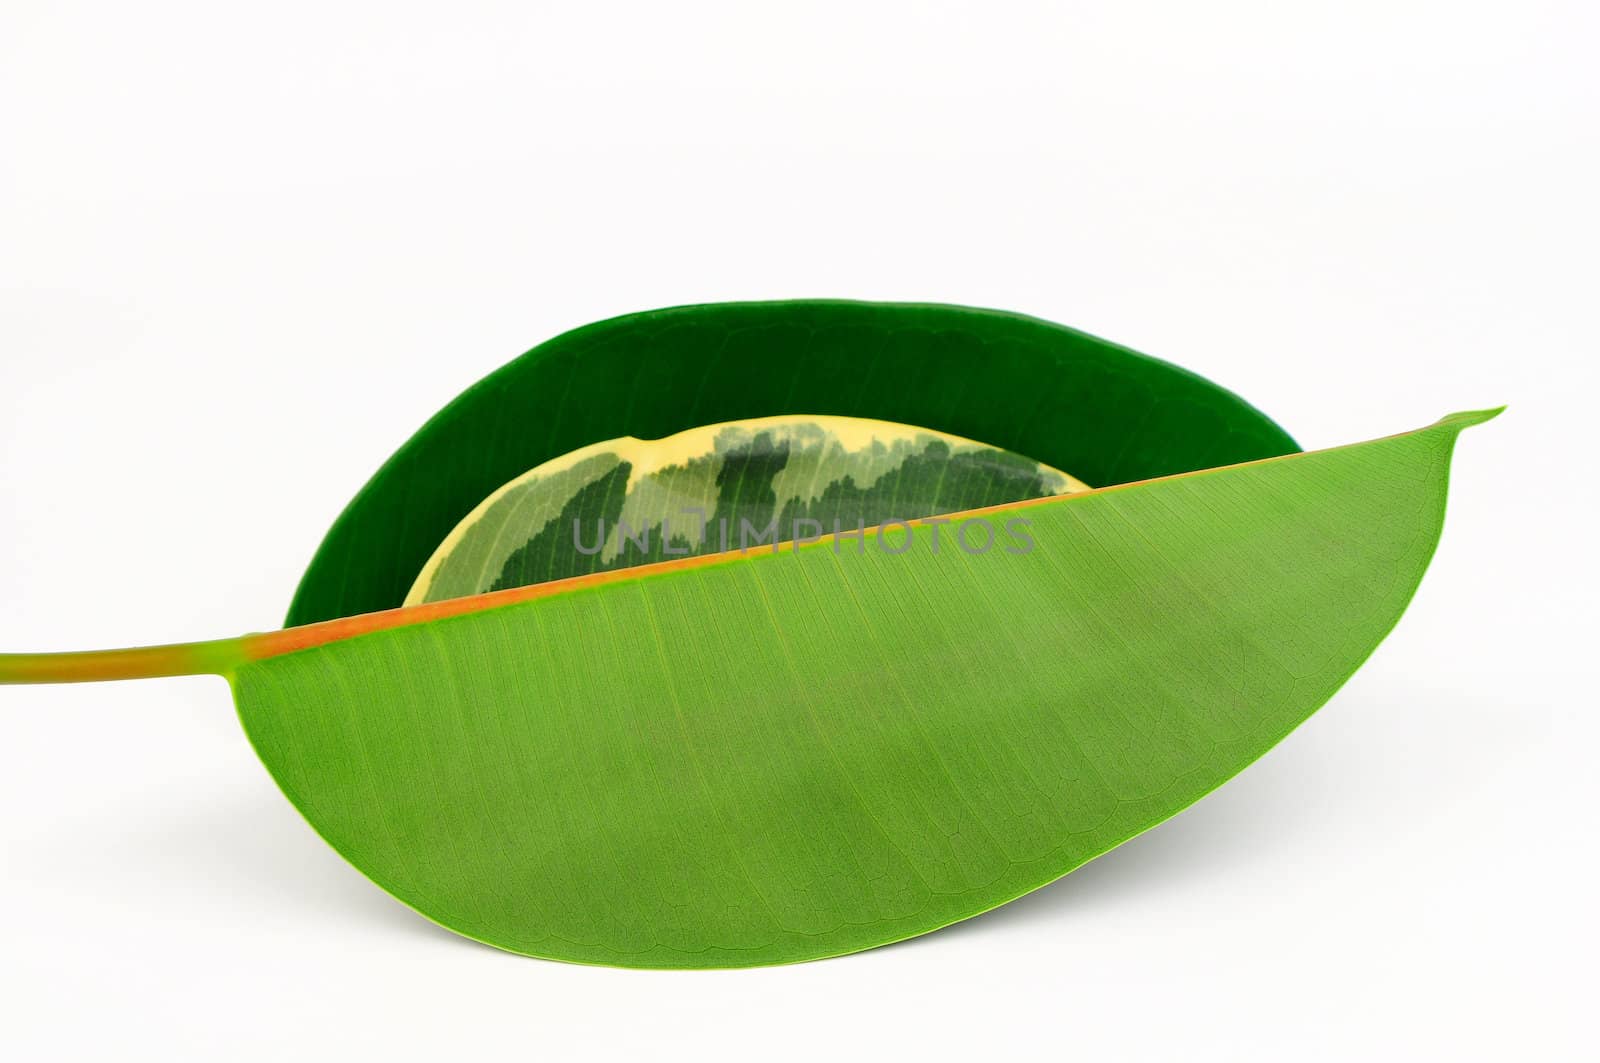 Three rubber tree leaves isolated in white background.